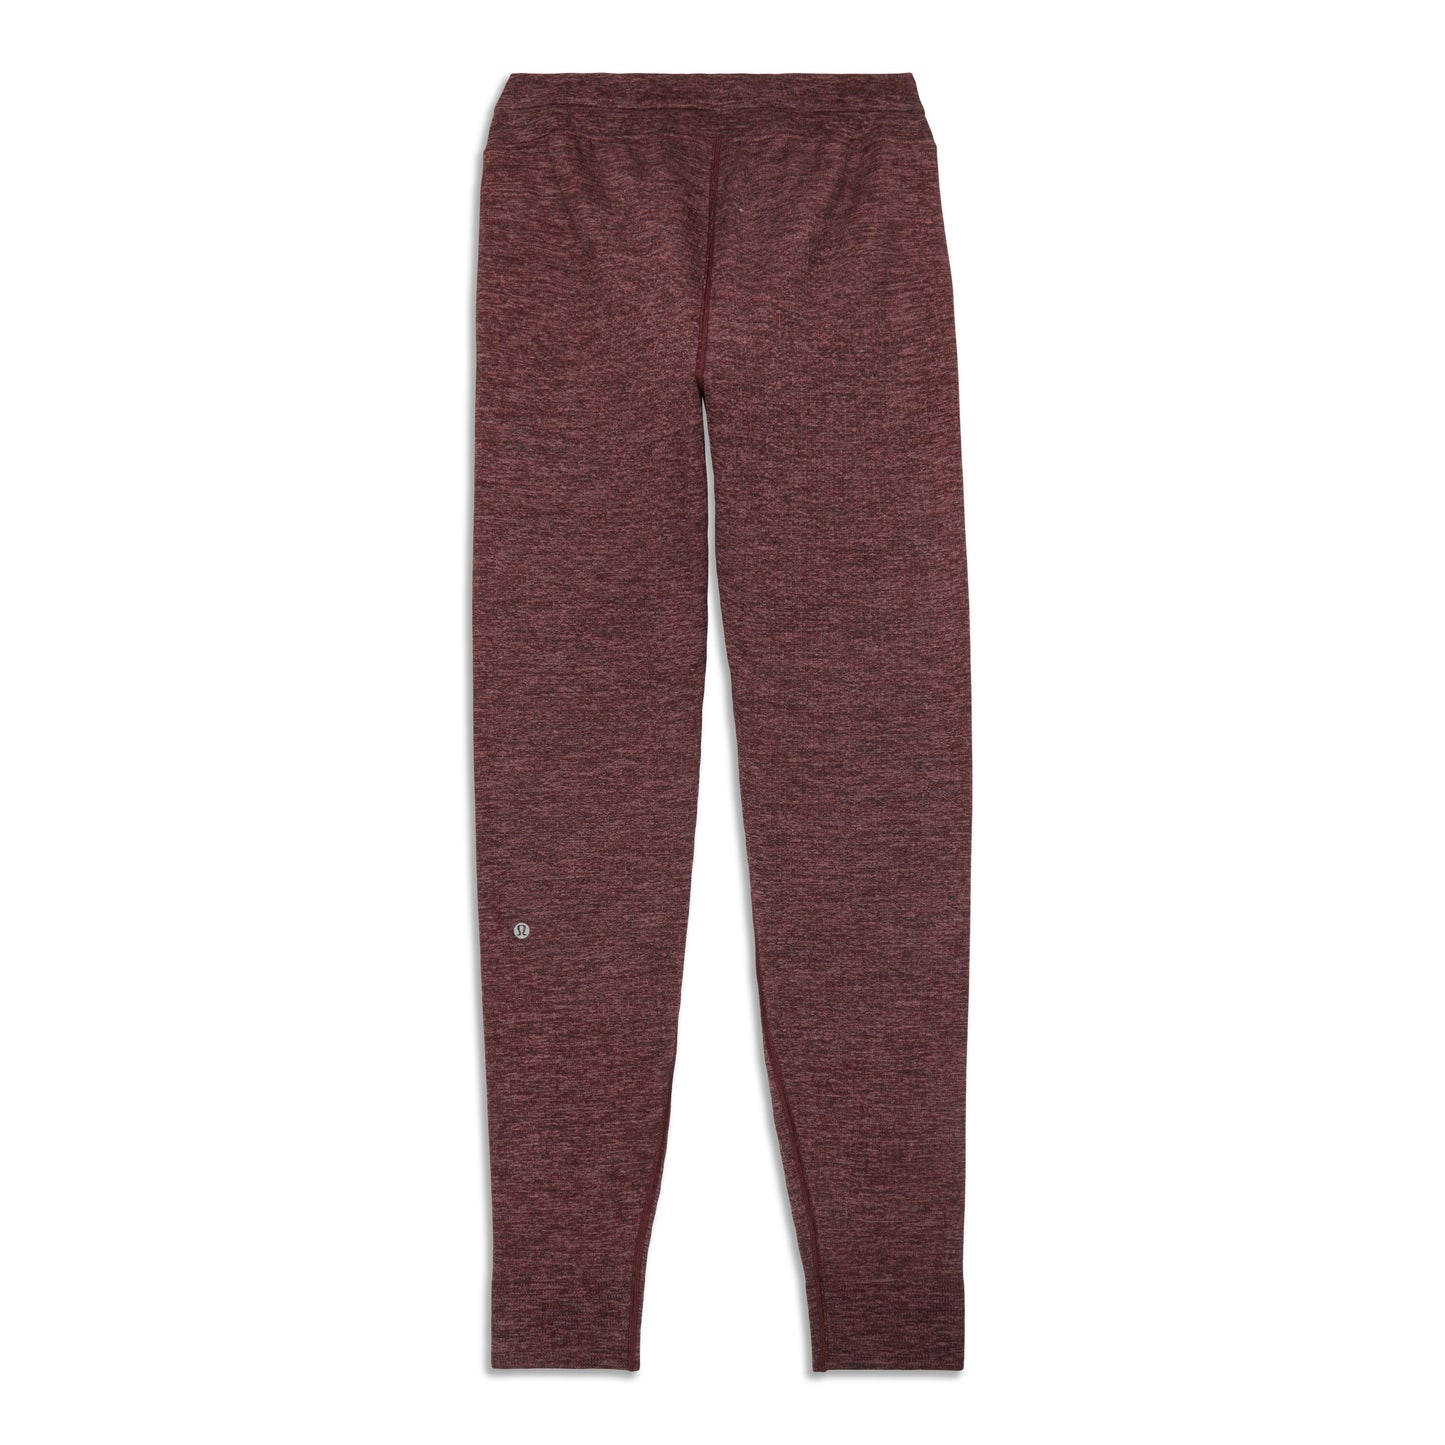 Engineered Warmth Jogger - Resale